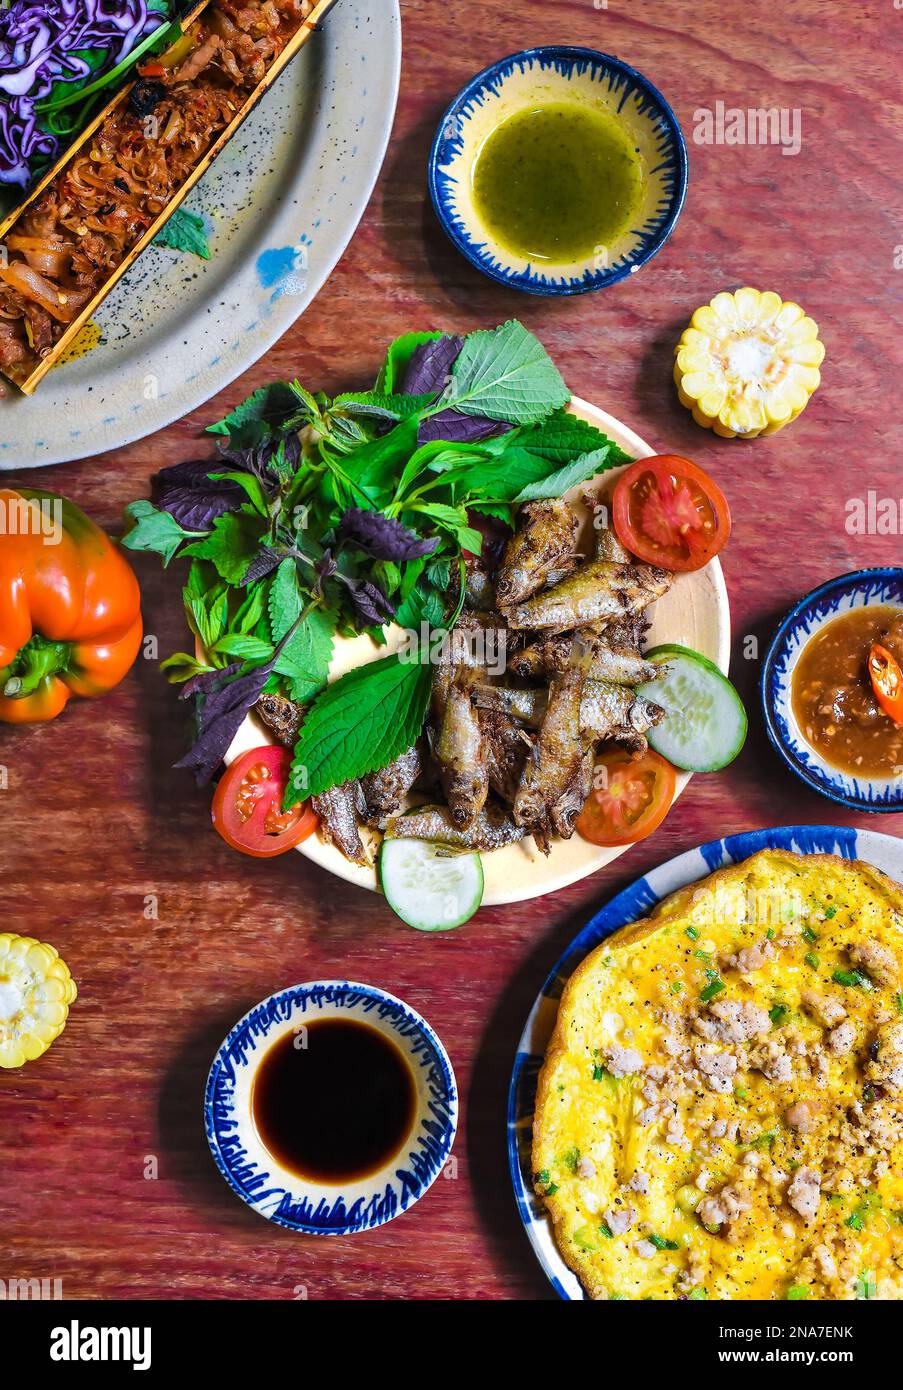 Vietnamese cuisine set made of braised deer in bamboo, fried fish, omelette with sauces on wooden table Stock Photo